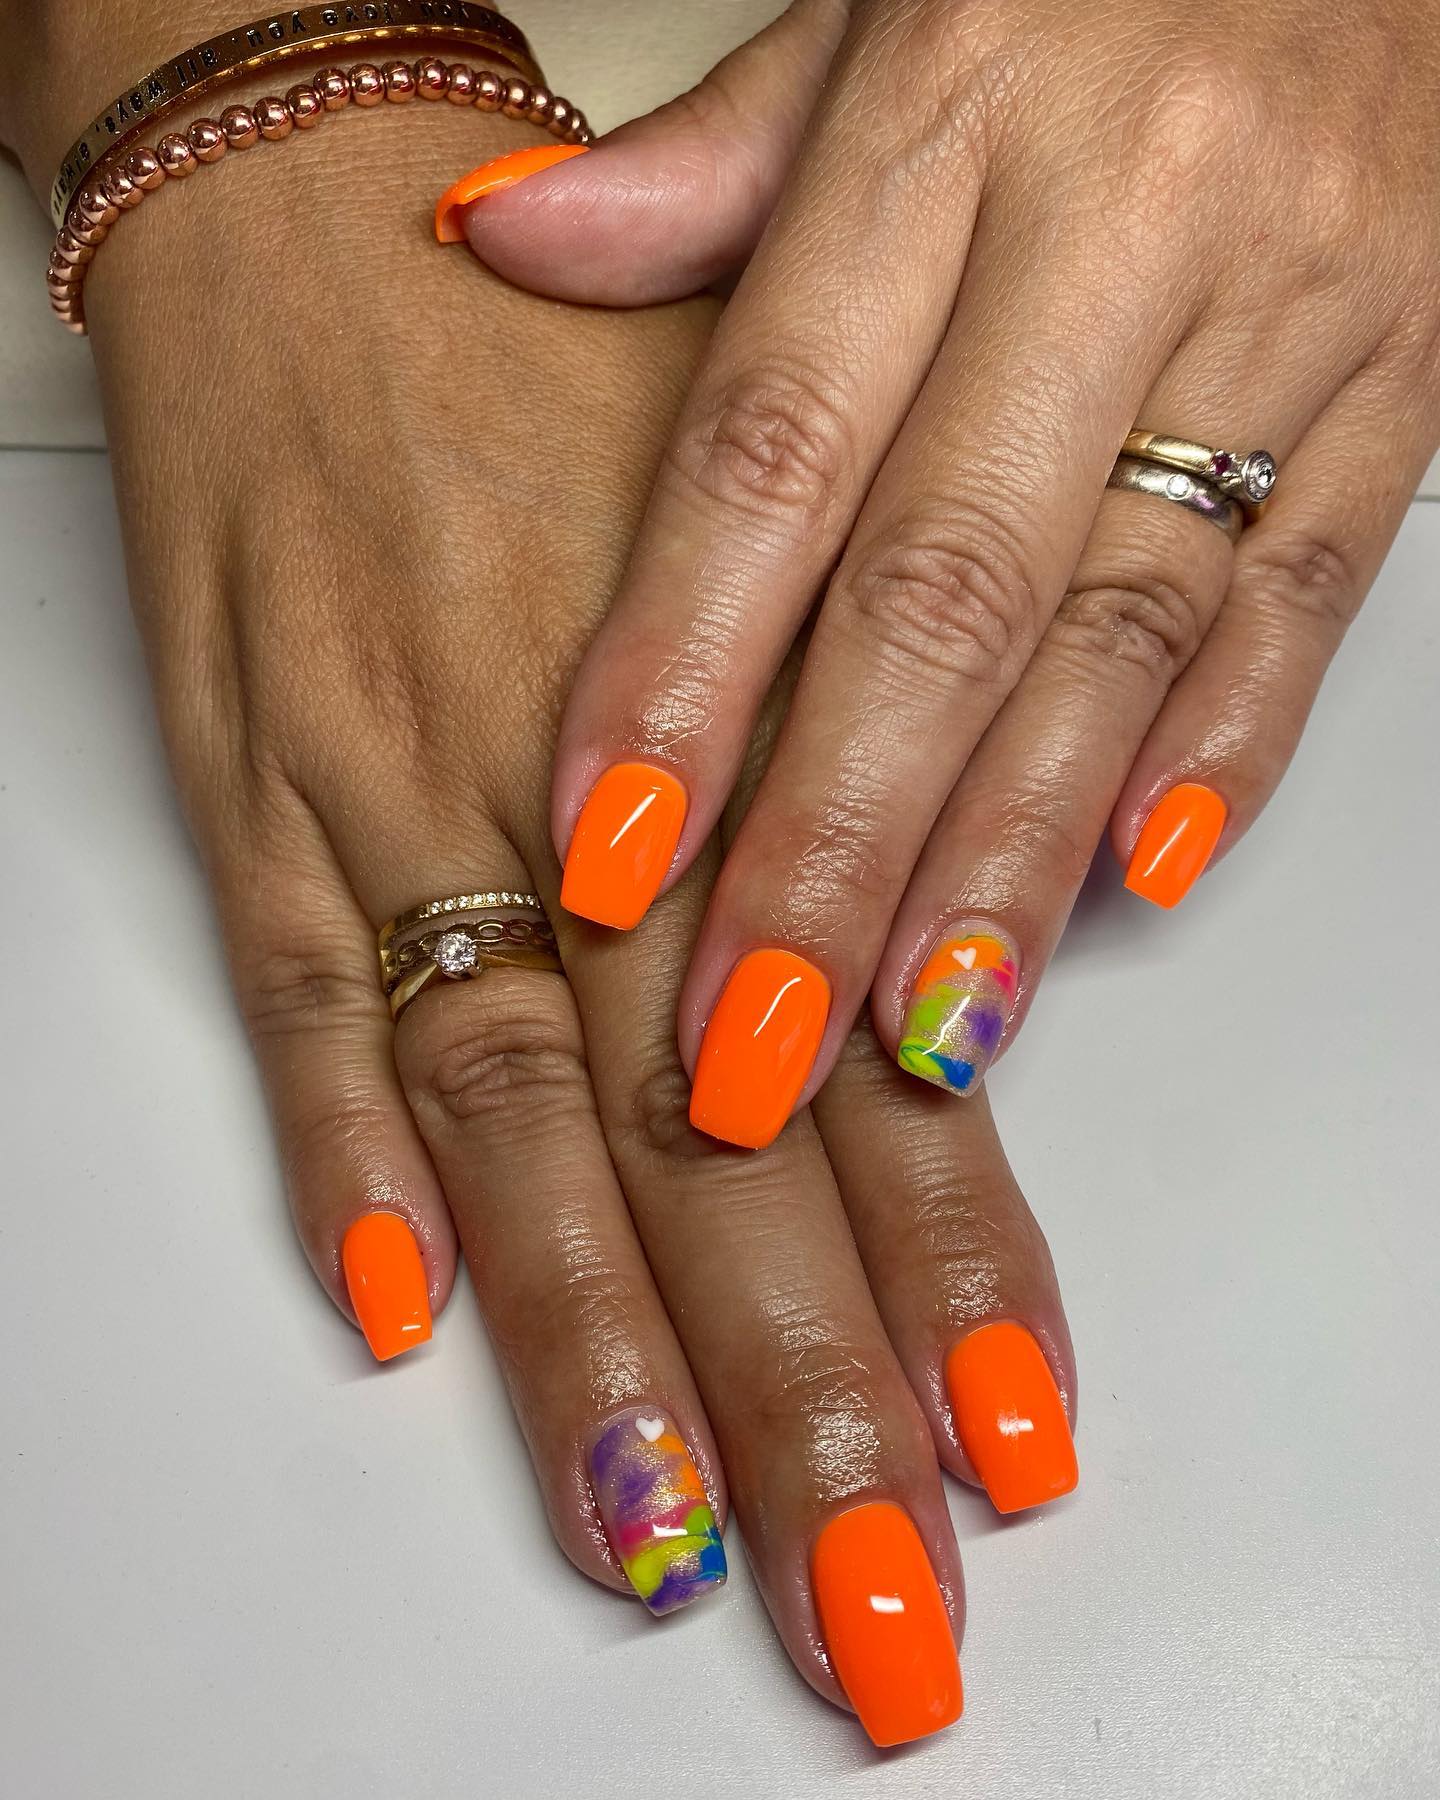 Neon Nails Are Trending for Summer, Says Pinterest Report | Allure